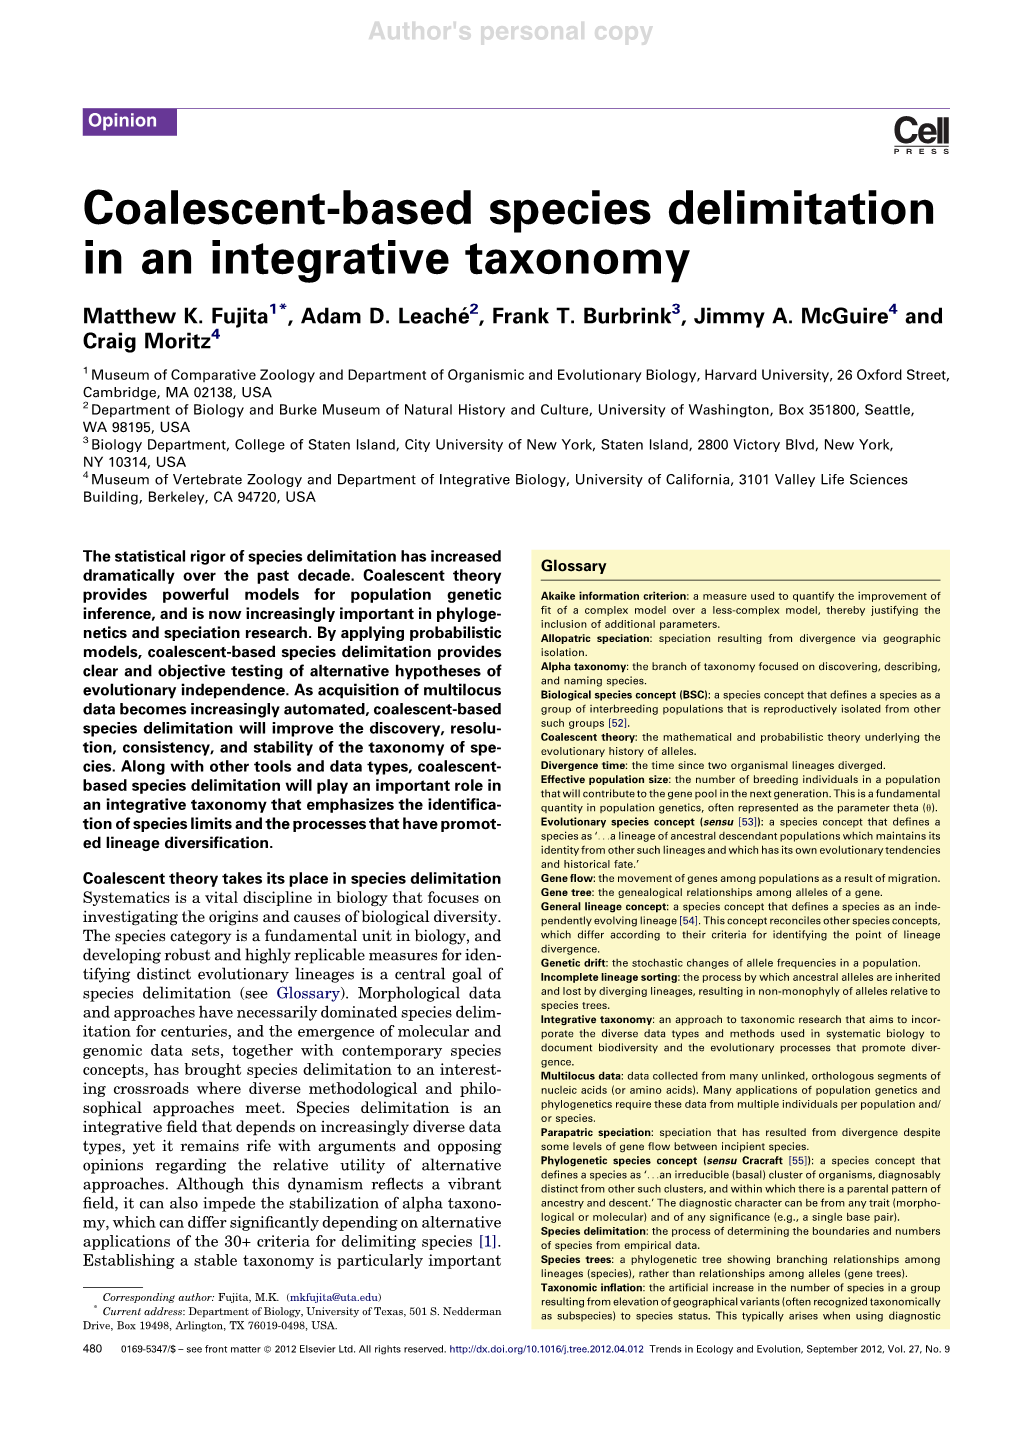 Coalescent-Based Species Delimitation in an Integrative Taxonomy